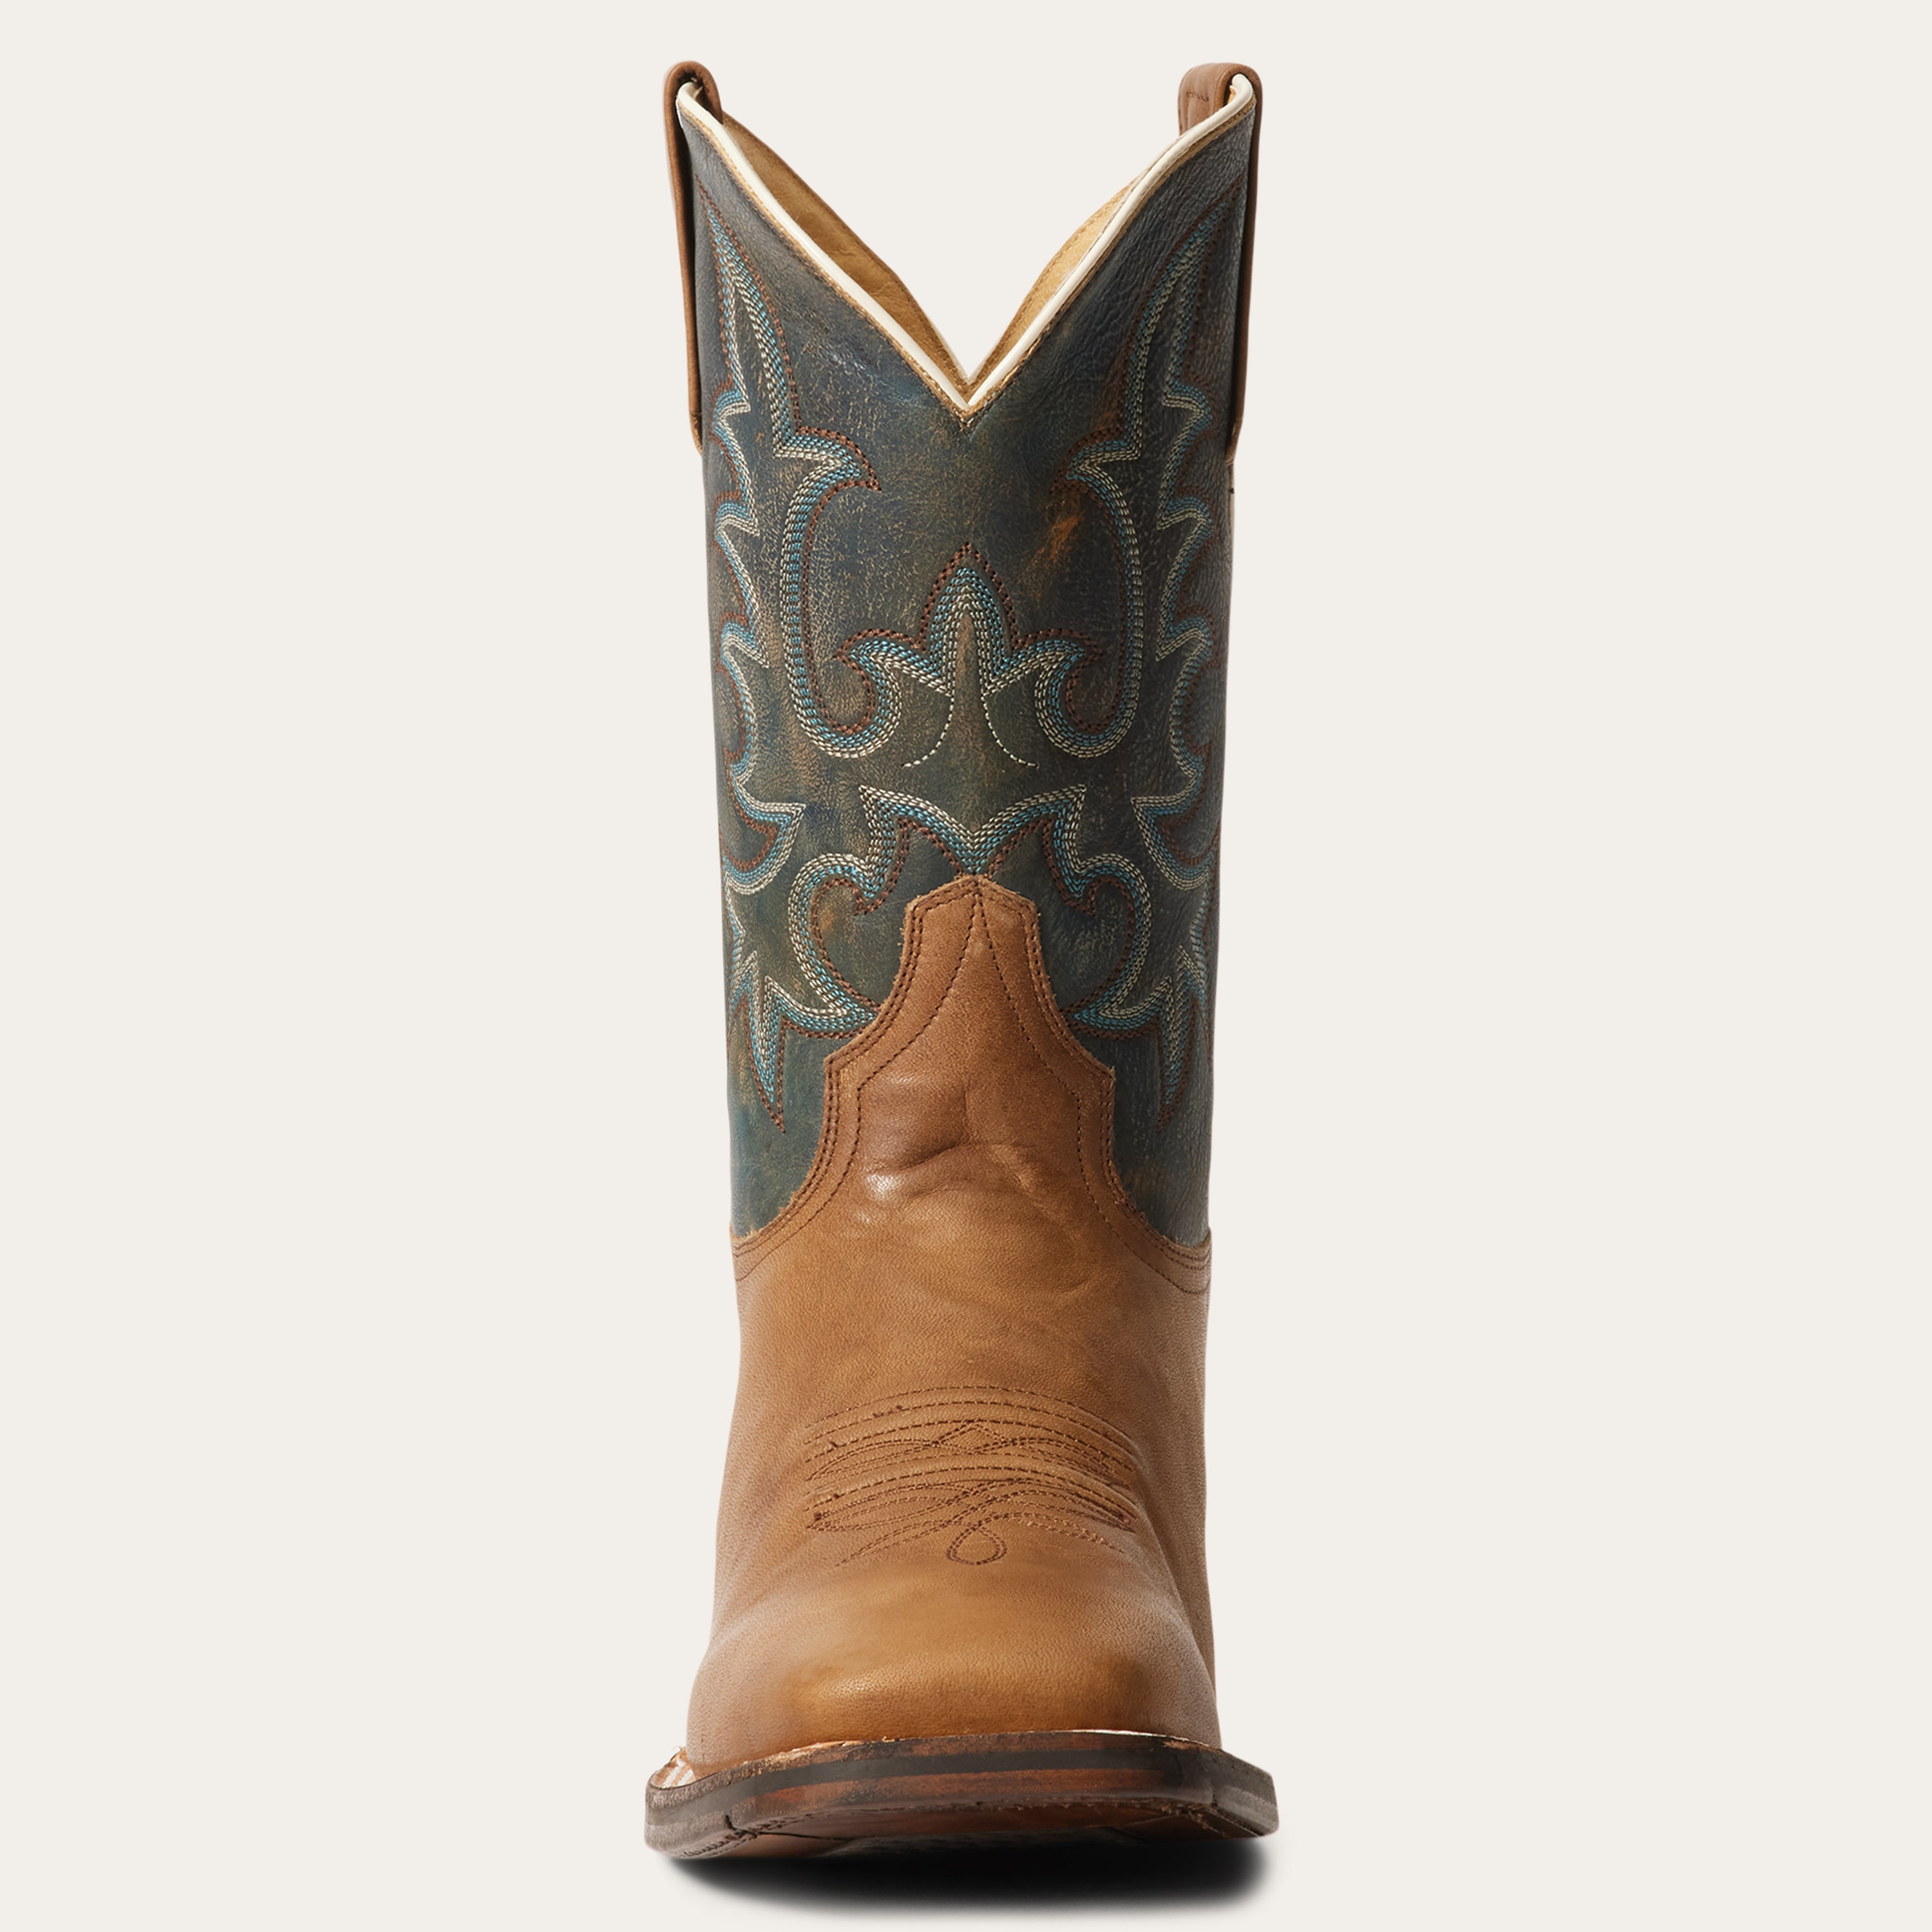 Stetson Adeline Women's Boots Burnished Brown : 6.5 B